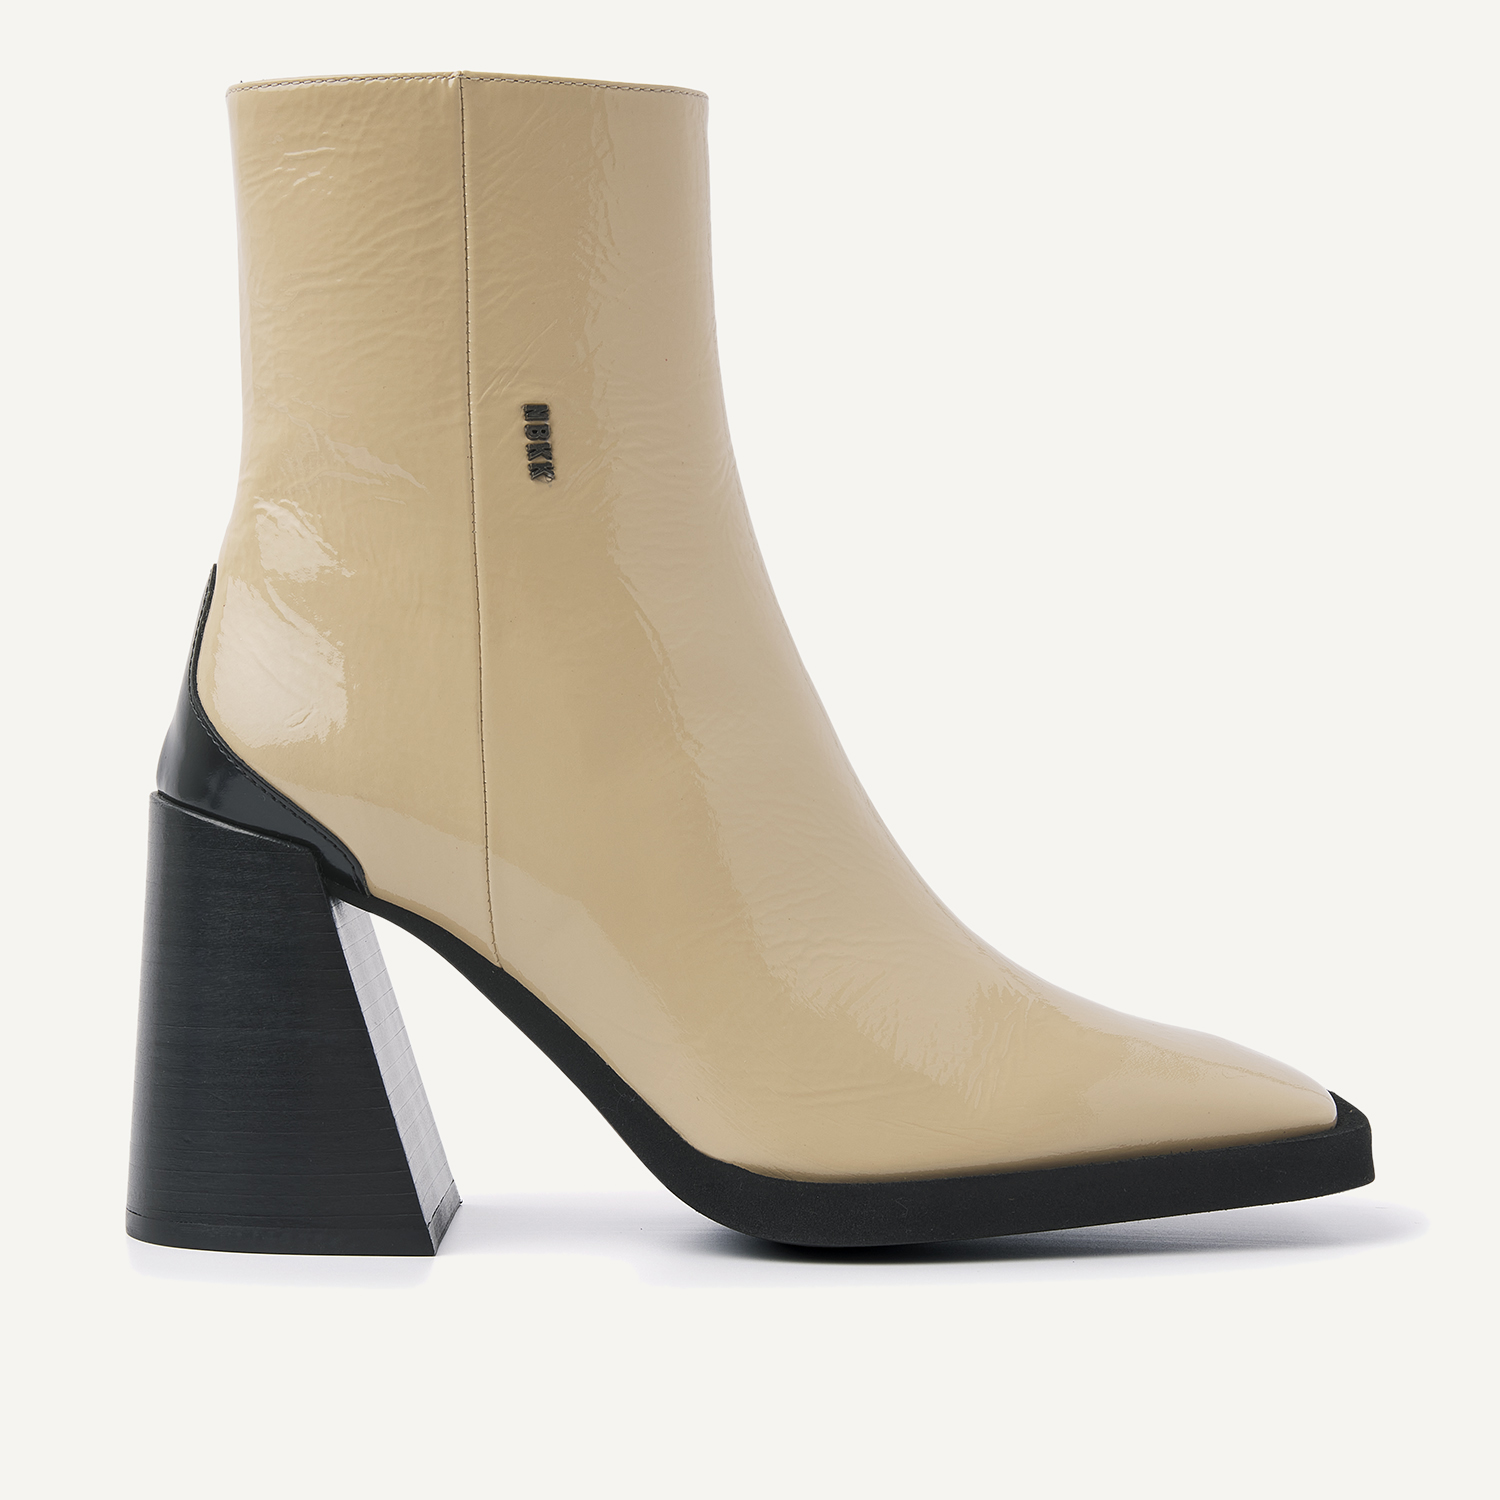 Lana Pilar II | Beige Patent Ankle Boots for Women